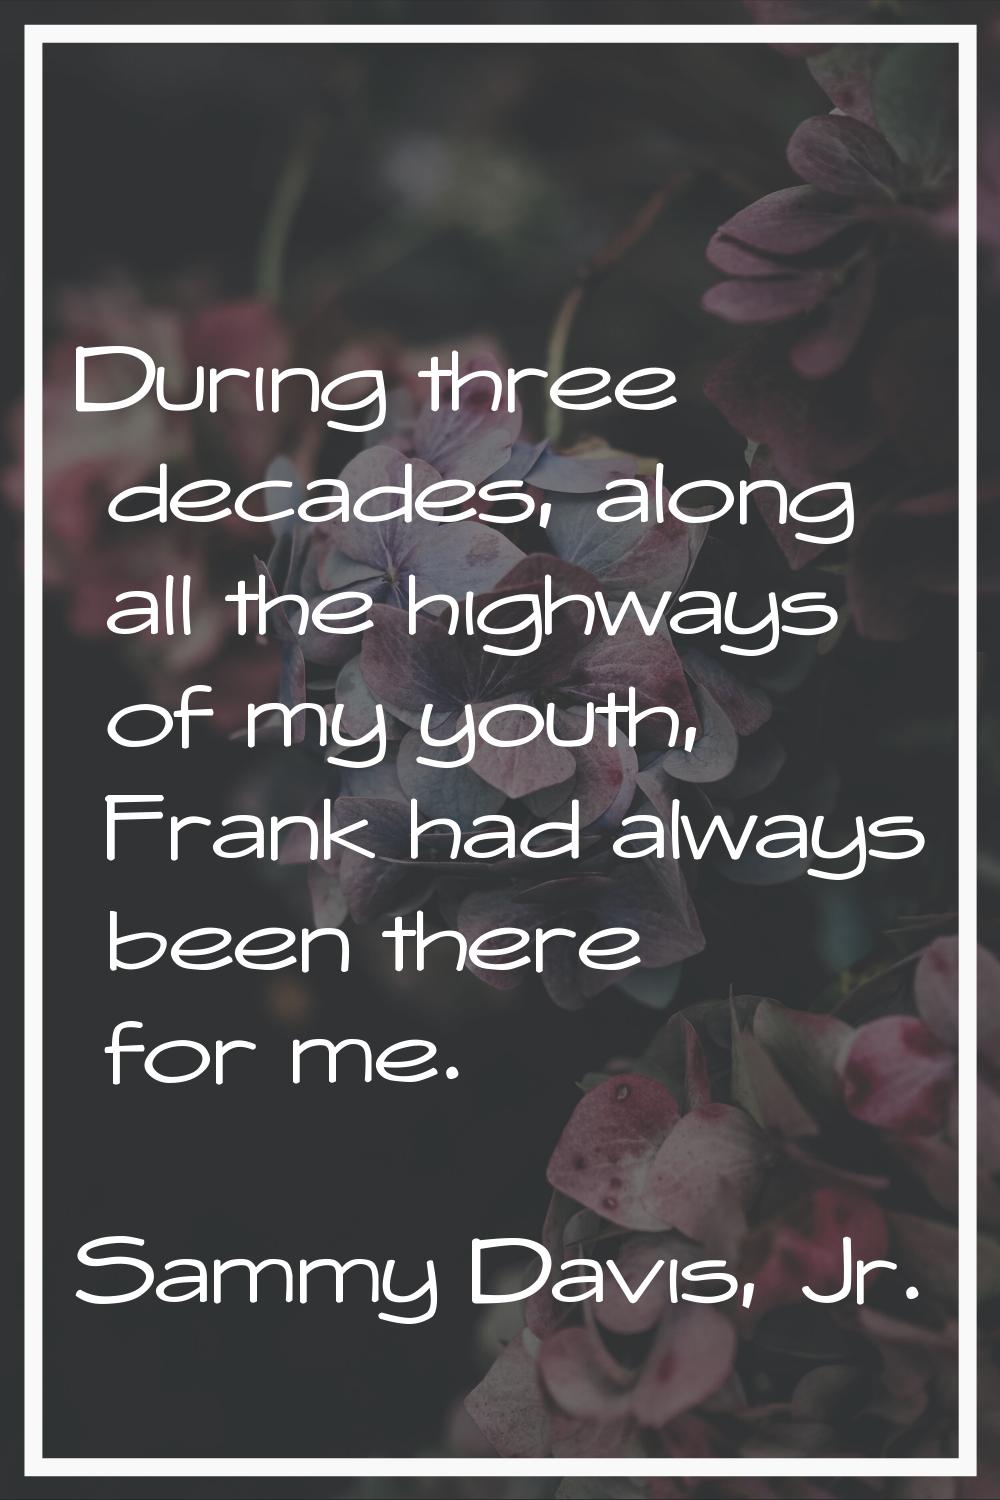 During three decades, along all the highways of my youth, Frank had always been there for me.